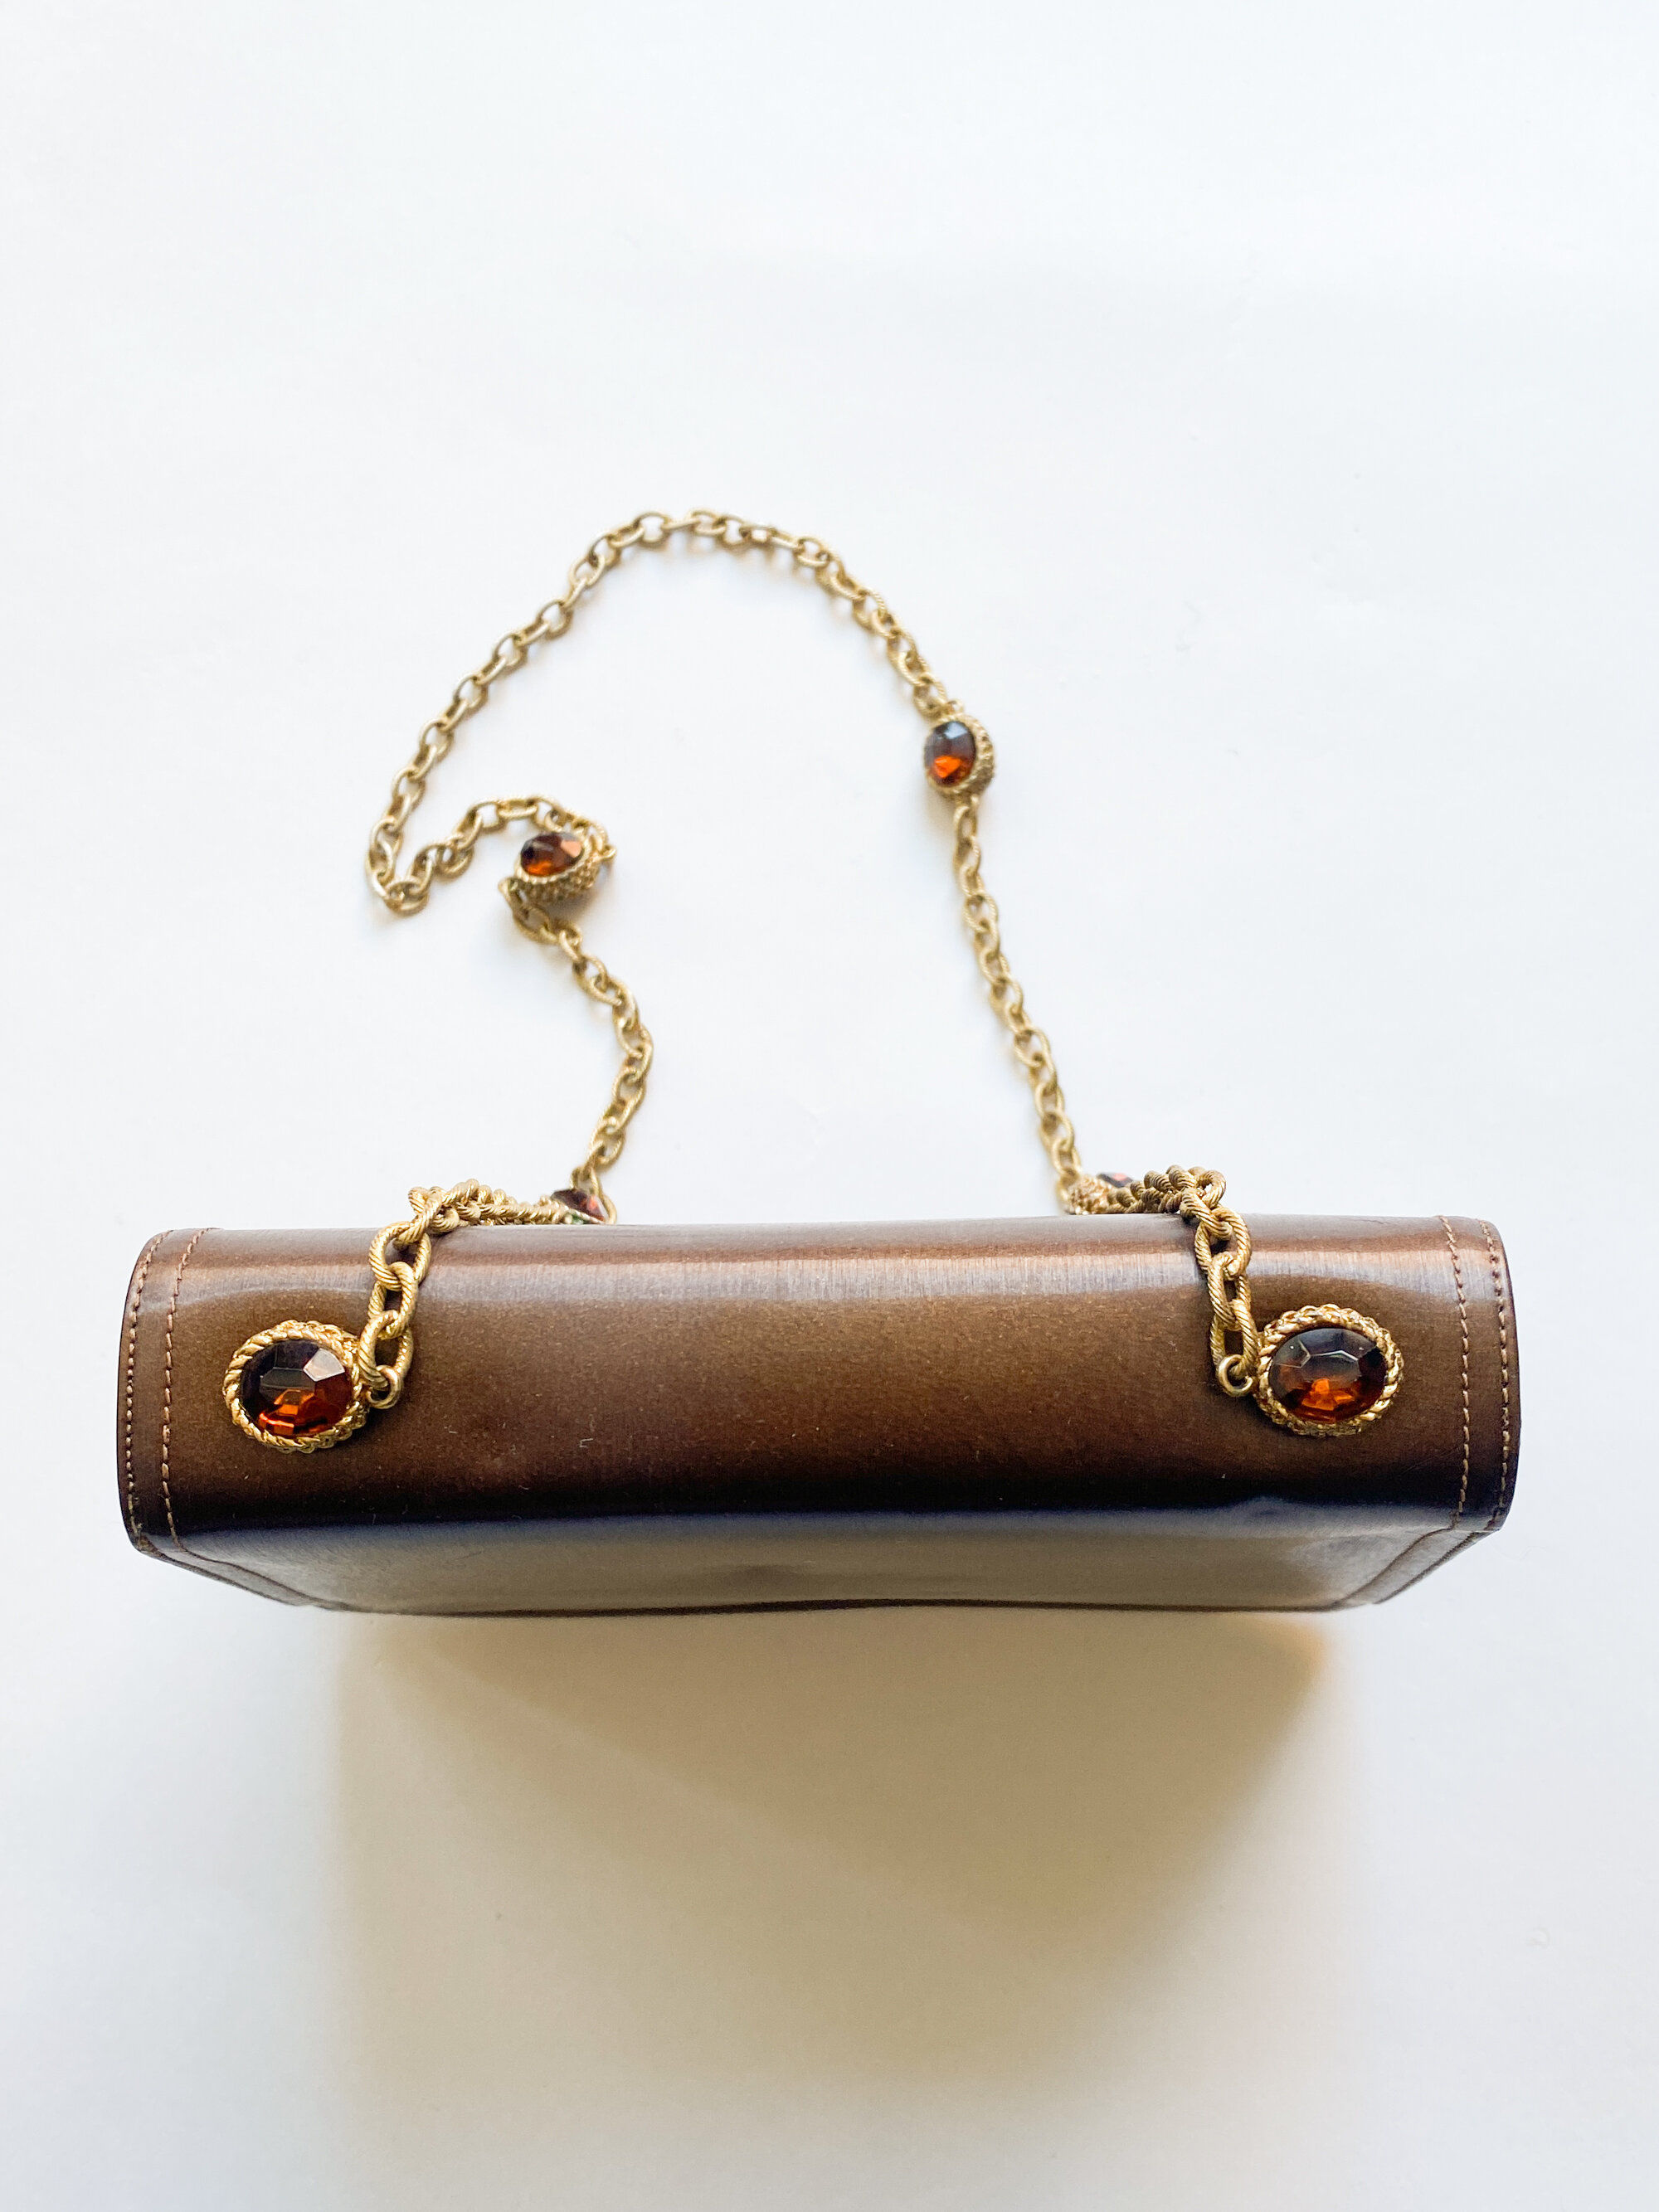 1960s Polished Calf Leather Bag with Jeweled Chain — Wayward Collection